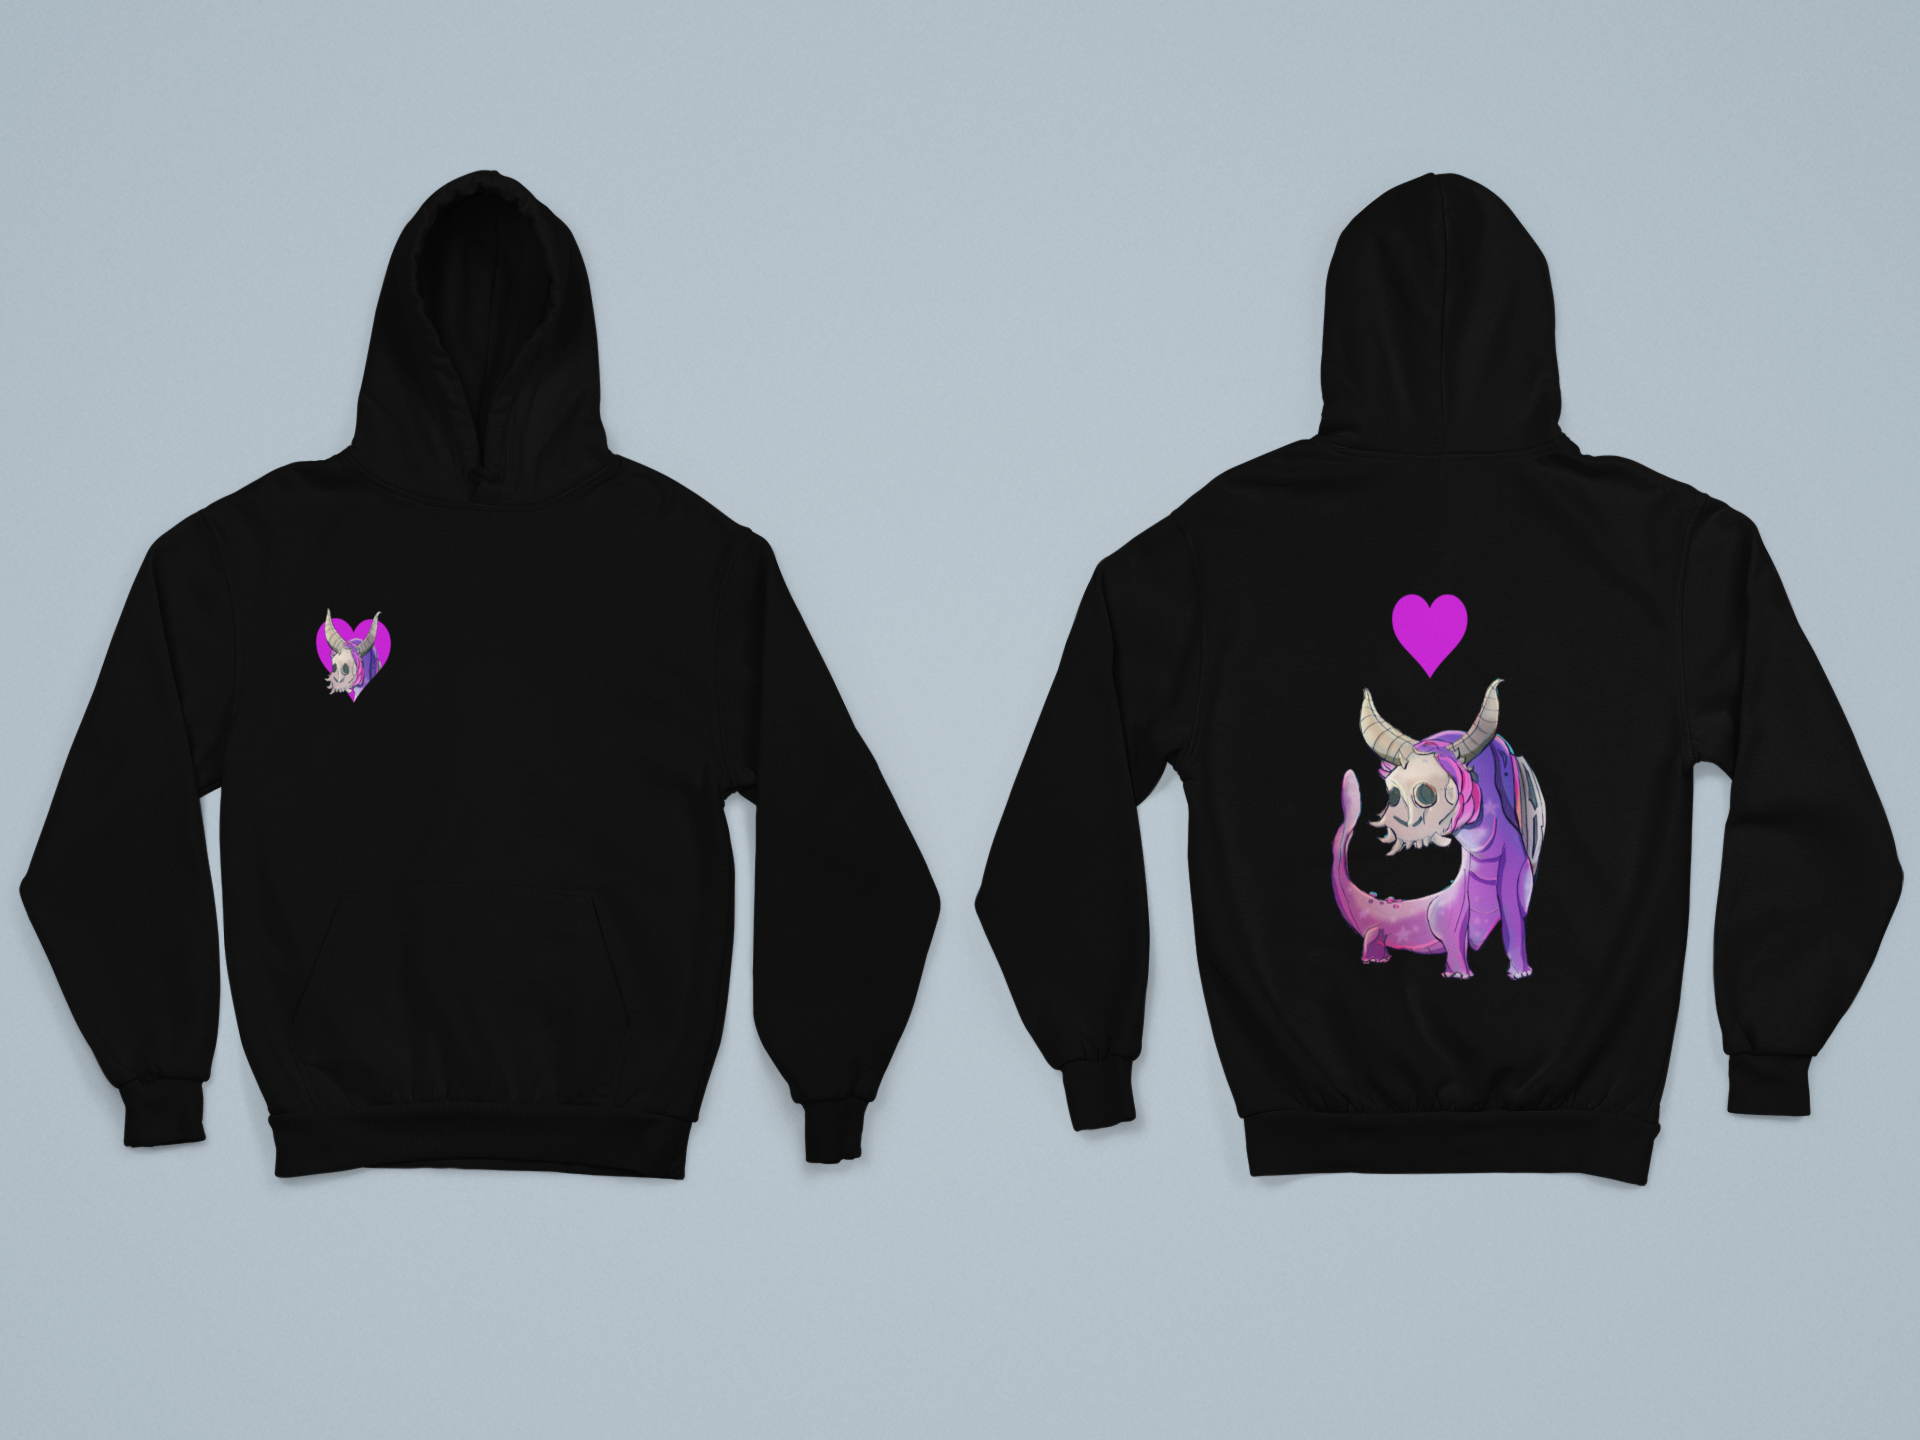 A image showing the front and back of the two designs used on the hoodie,black hoodie. On front a pocket sized graphic of  a horned creature sticking its head through the heart.On back A purple horned salamander type creature heart above creatures head 